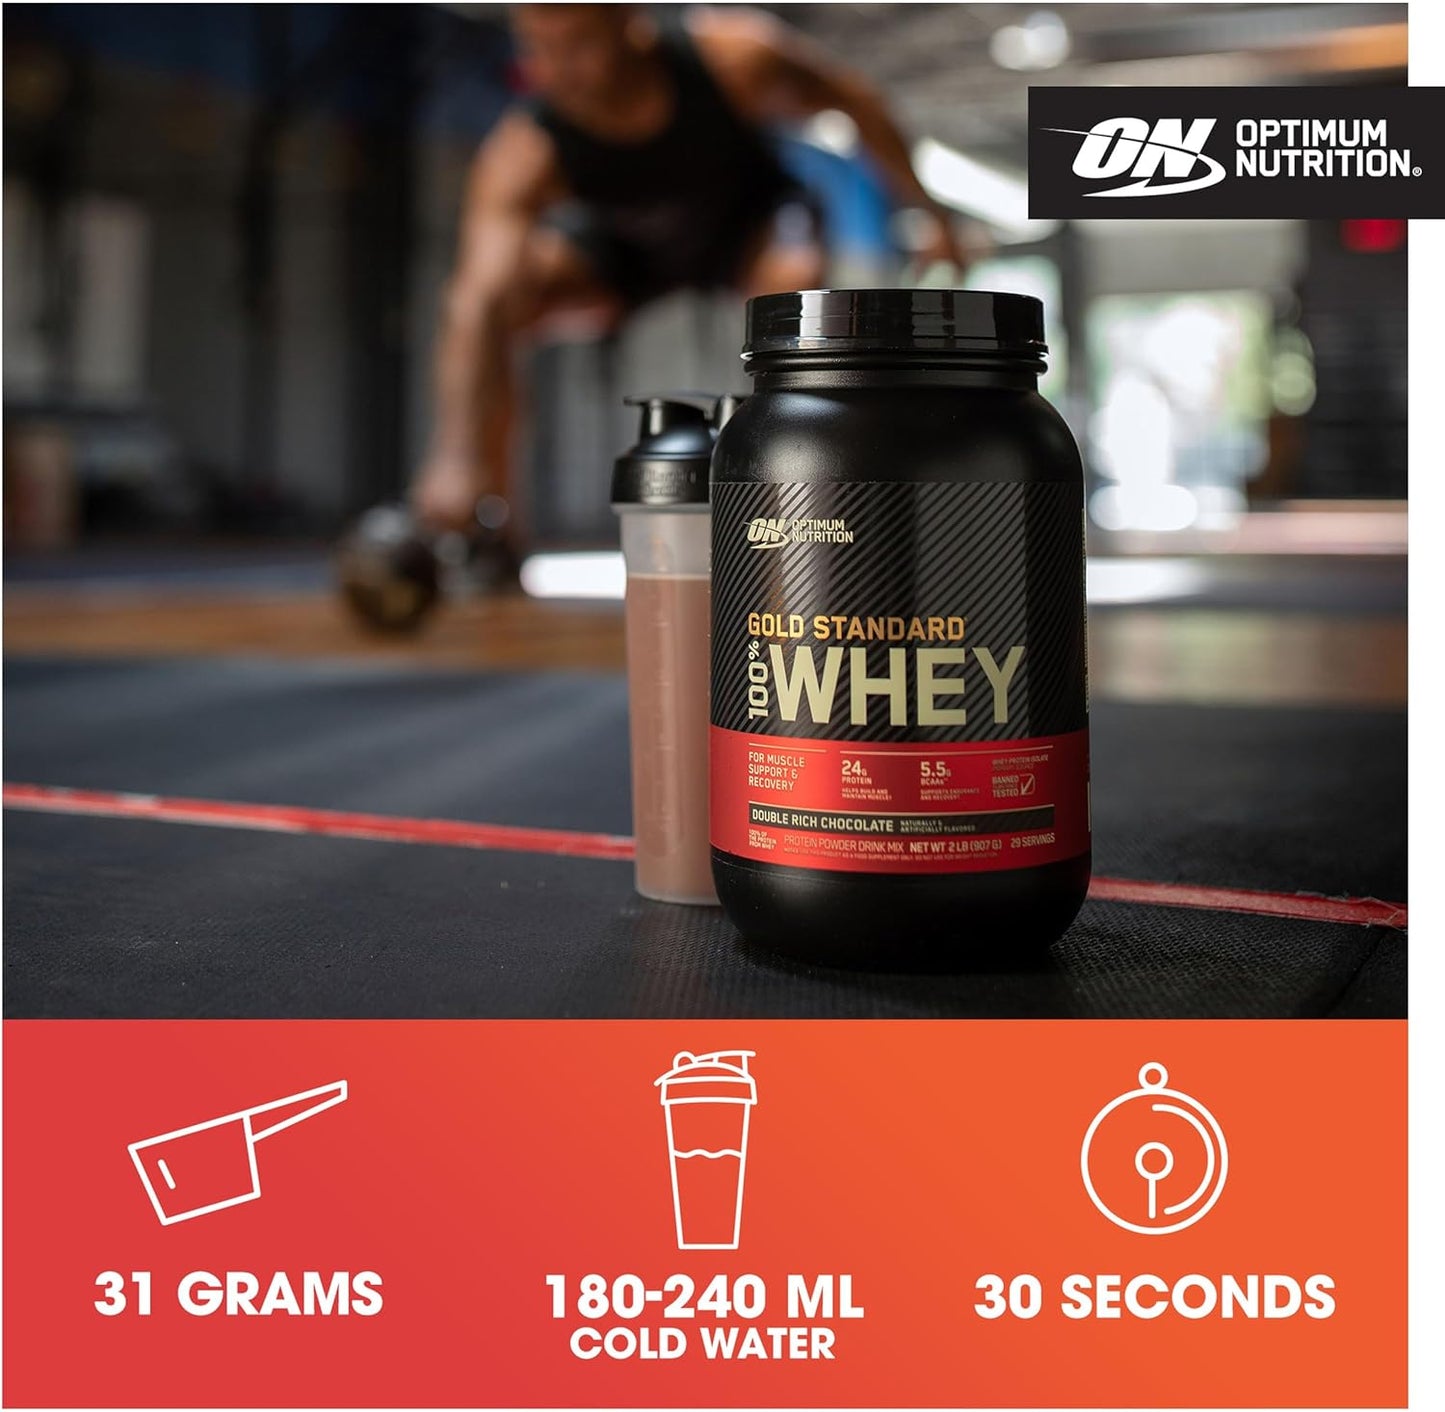 Gold Standard 100% Whey Muscle Building and Recovery Protein Powder with Naturally Occurring Glutamine and BCAA Amino Acids, Vanilla Ice Cream Flavour, 30 Servings, 900 G